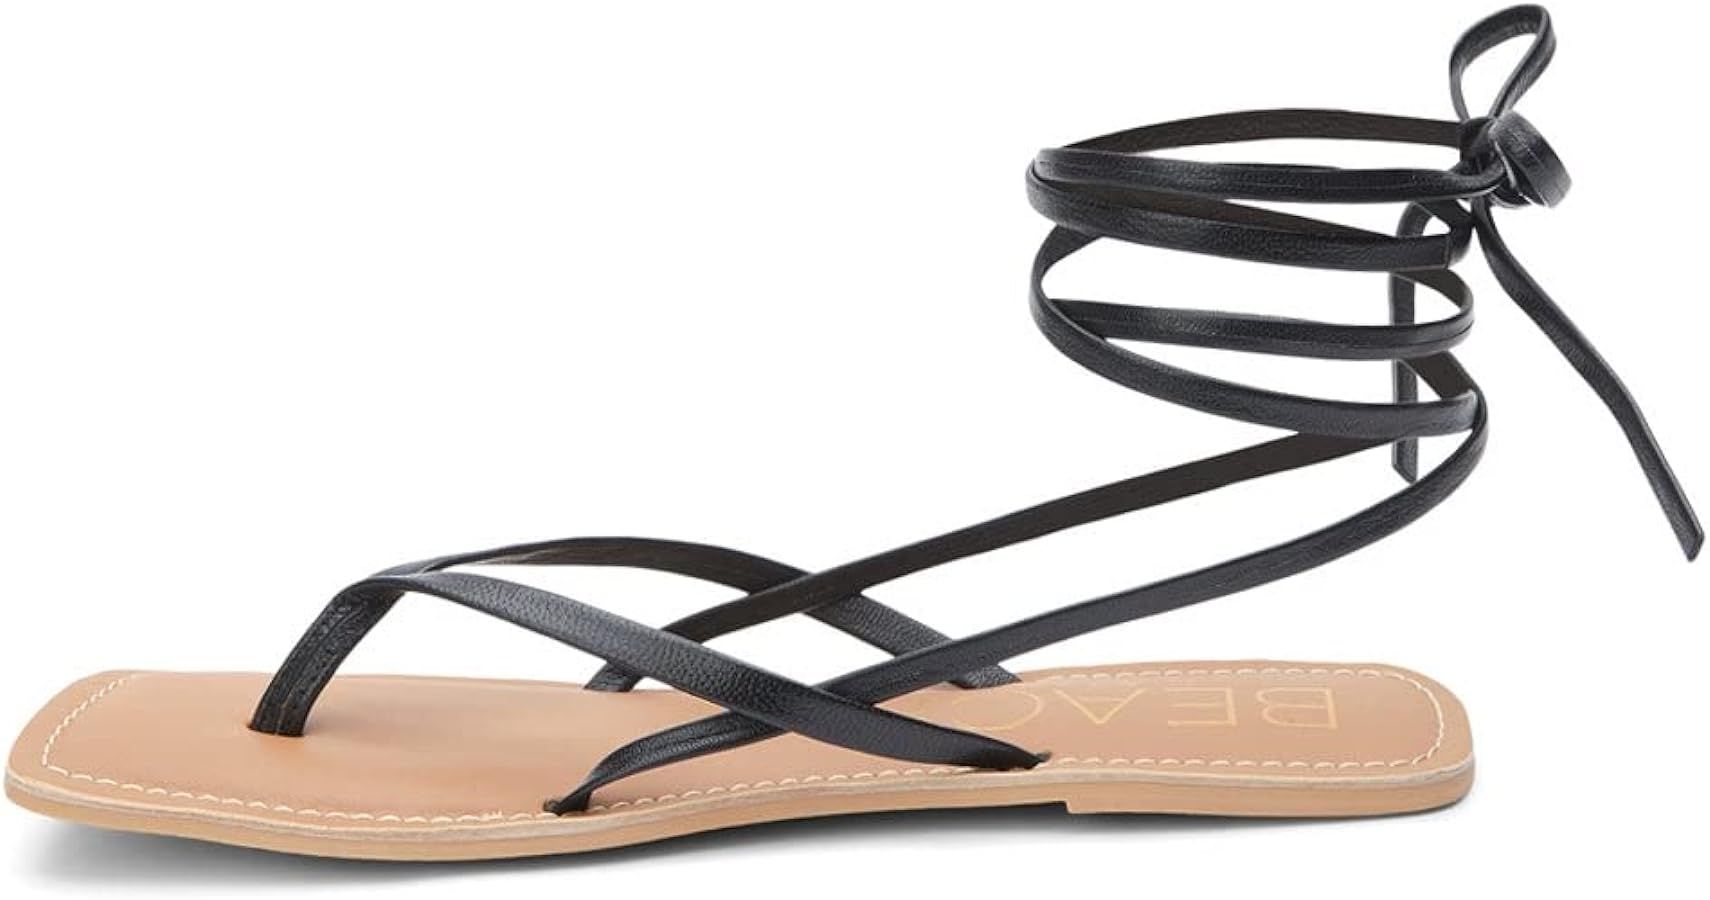 BEACH by Matisse Womens Bocas Lace Up Athletic Sandals Casual - Black | Amazon (US)